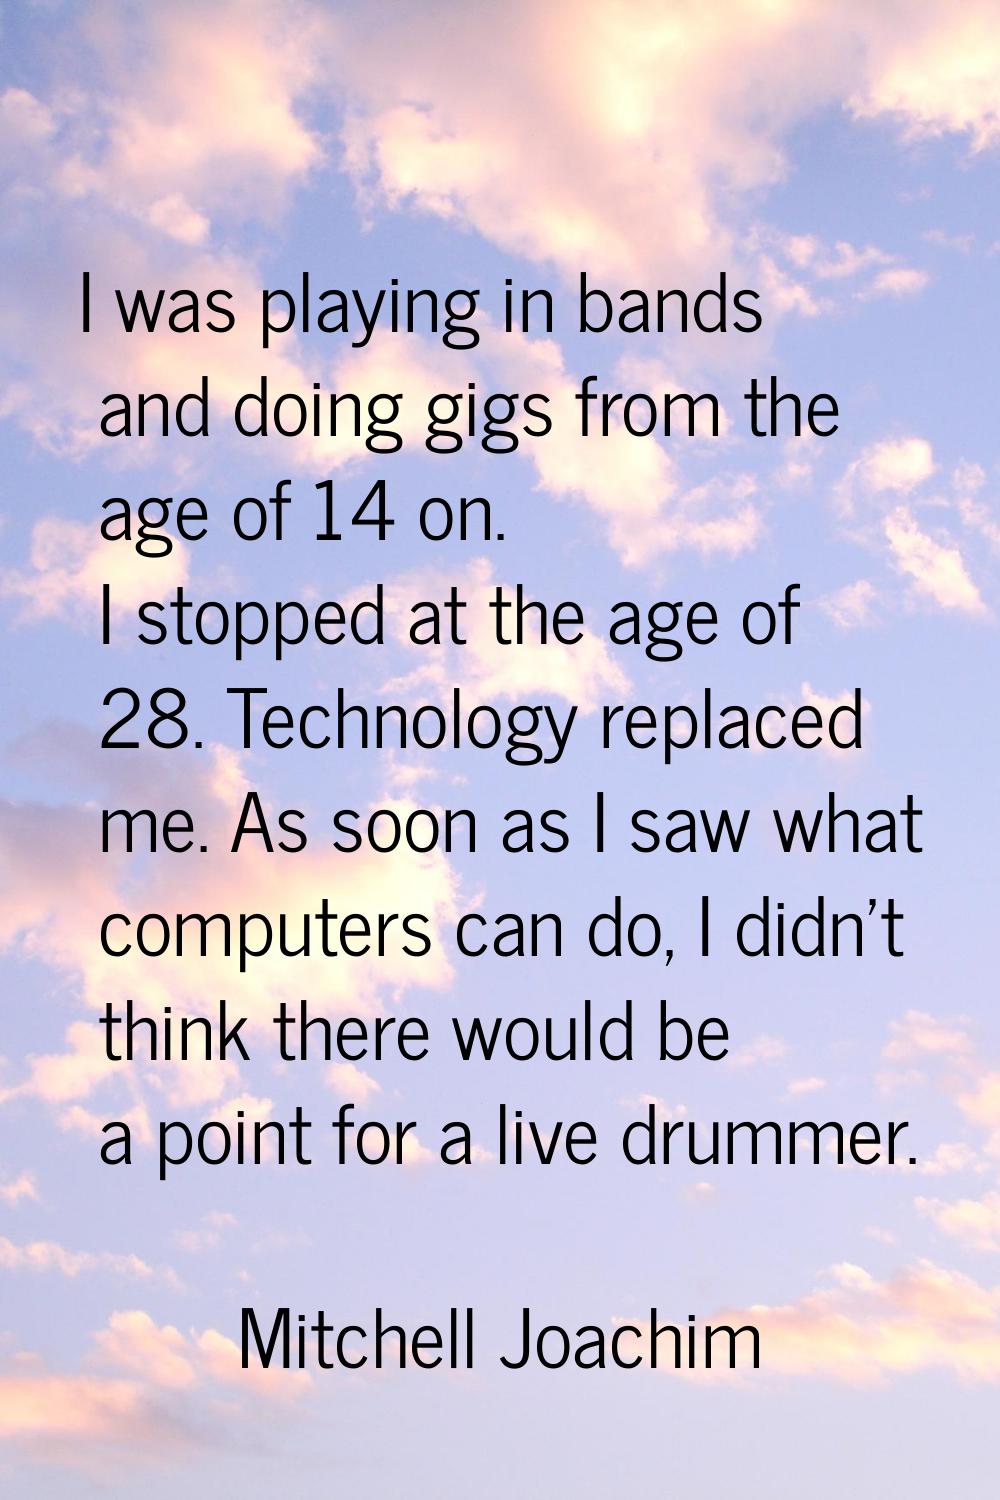 I was playing in bands and doing gigs from the age of 14 on. I stopped at the age of 28. Technology